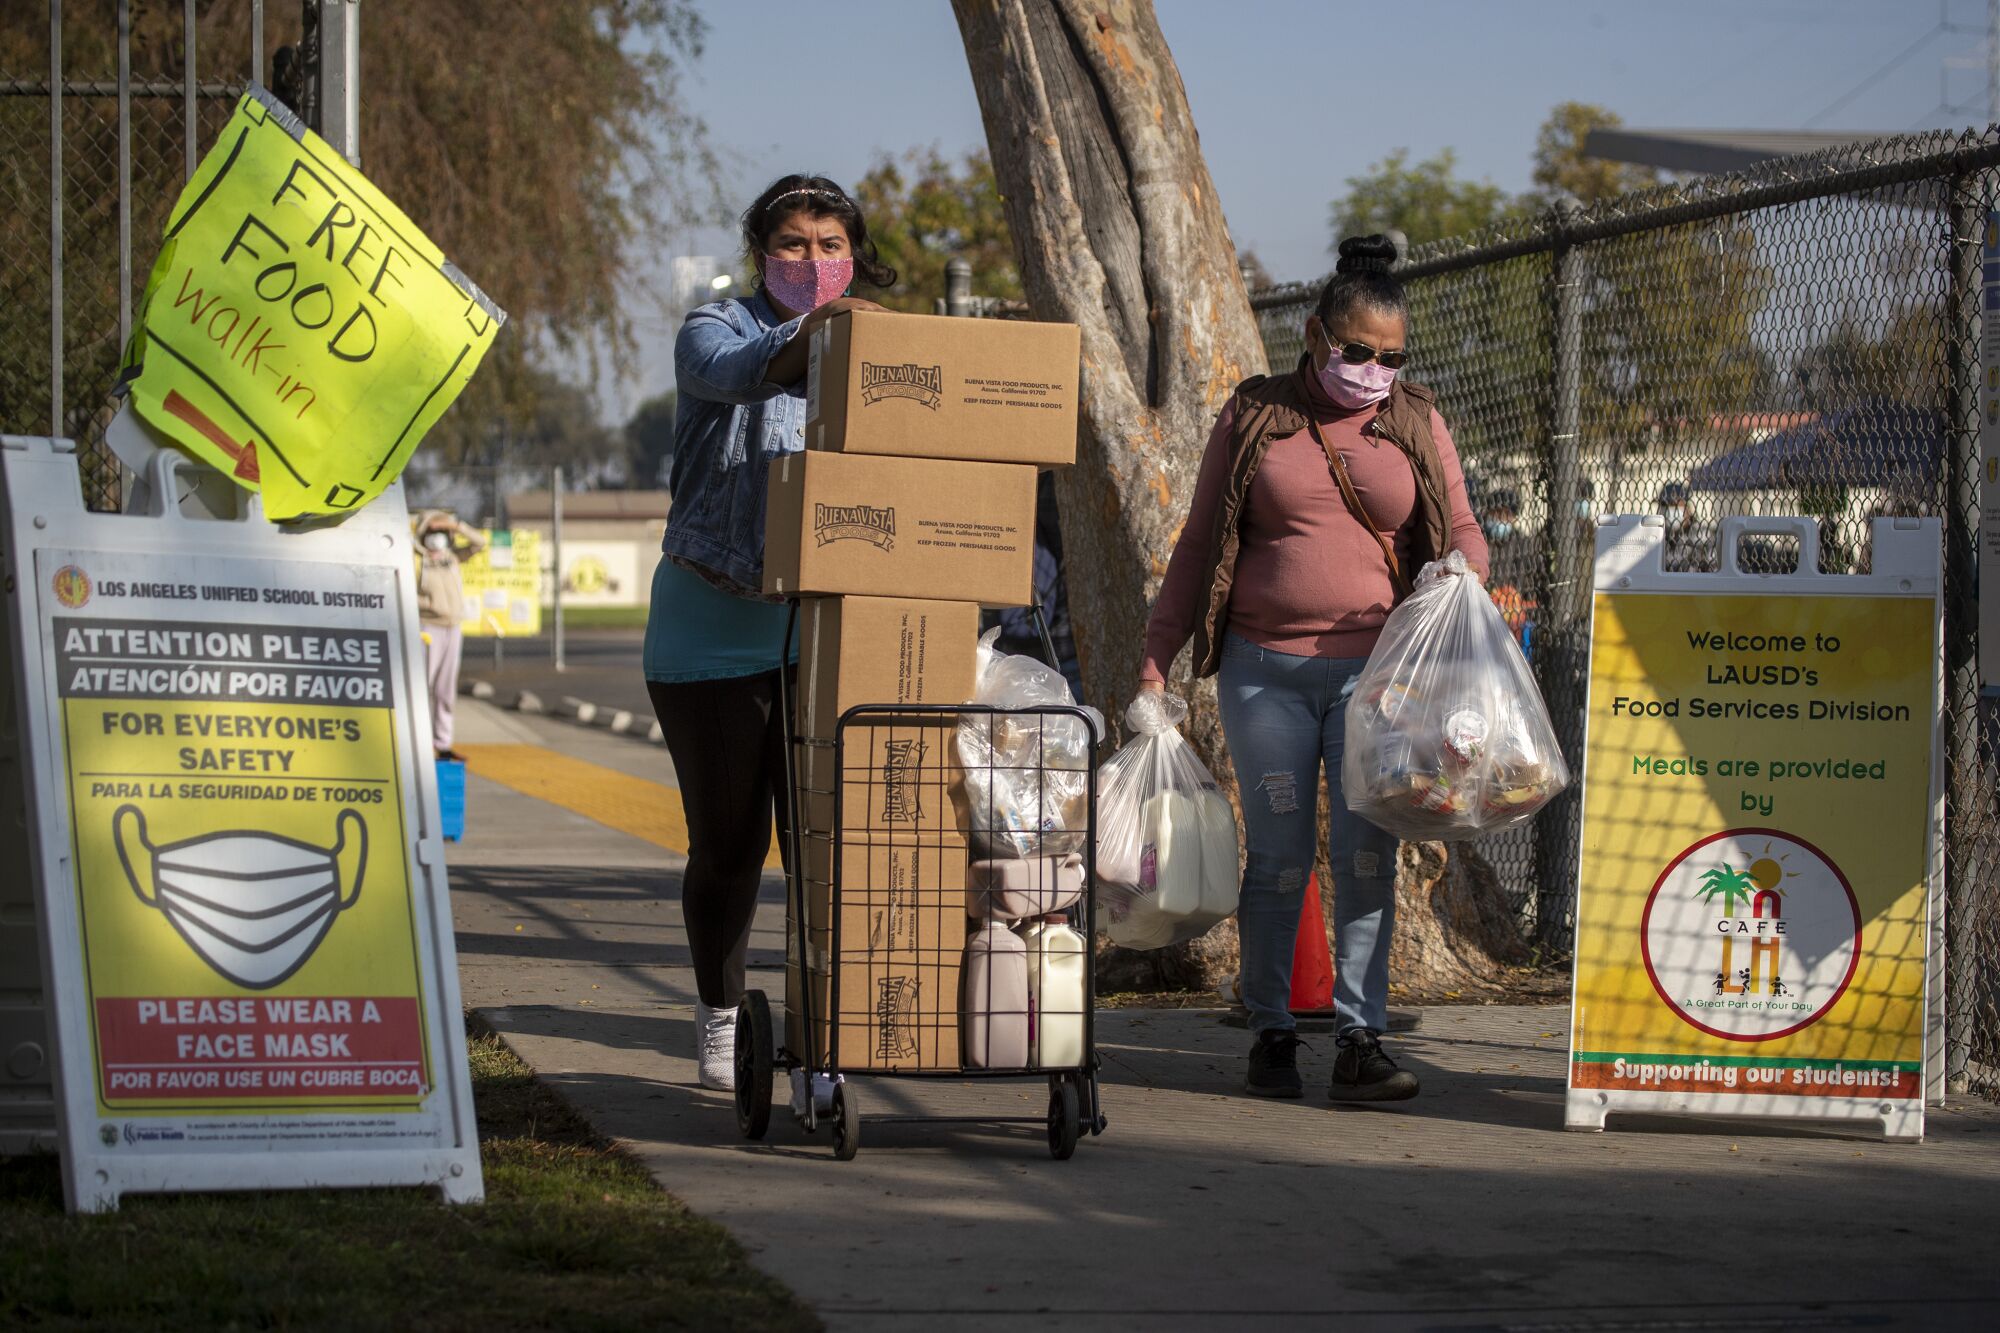 Two women push a cart filled with boxes and carry plastic bags full of food